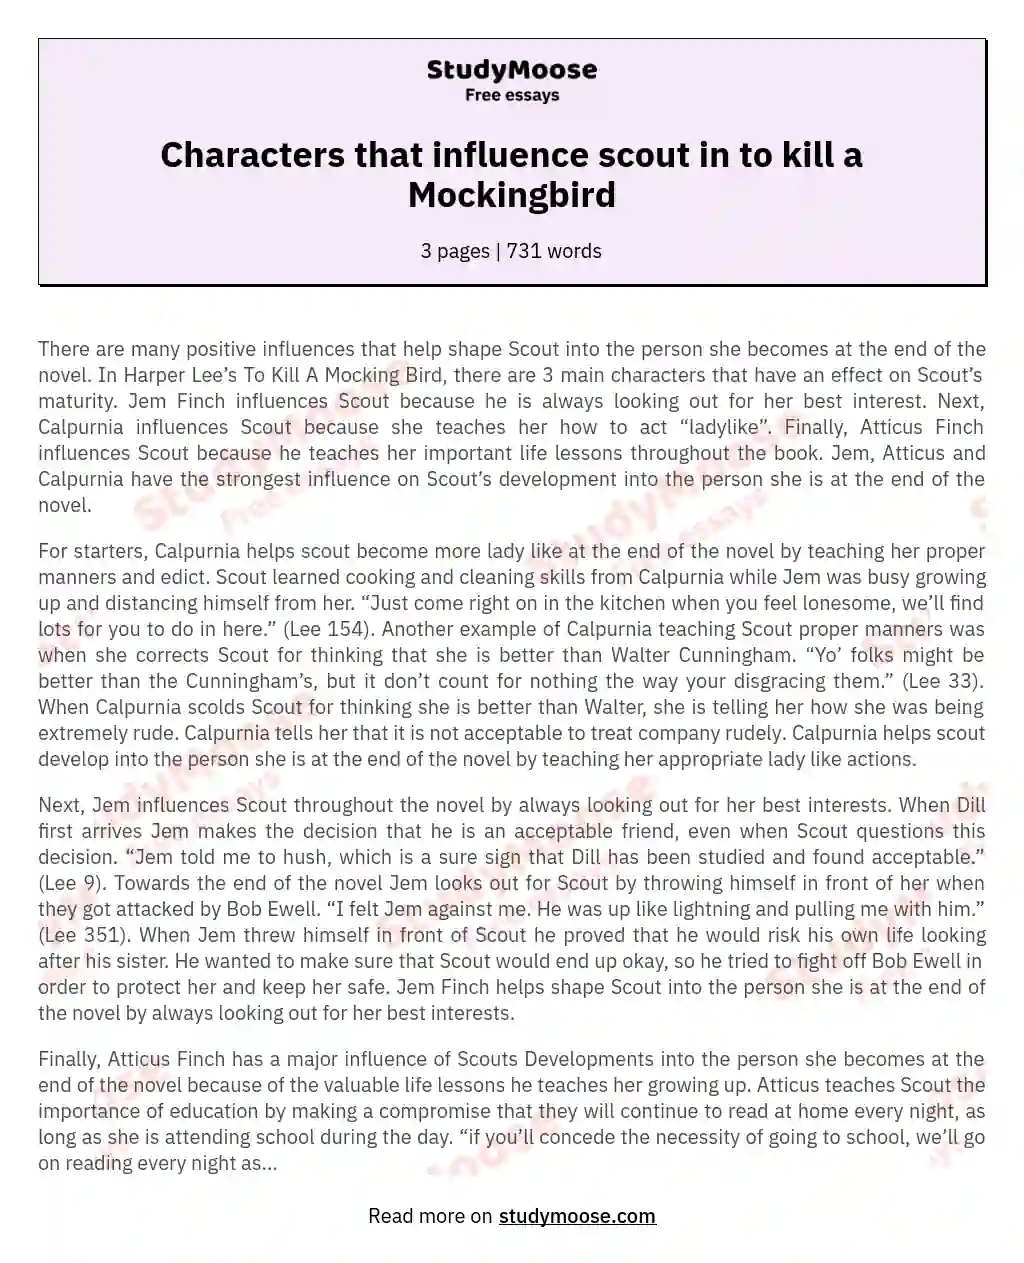 Characters that influence scout in to kill a Mockingbird essay